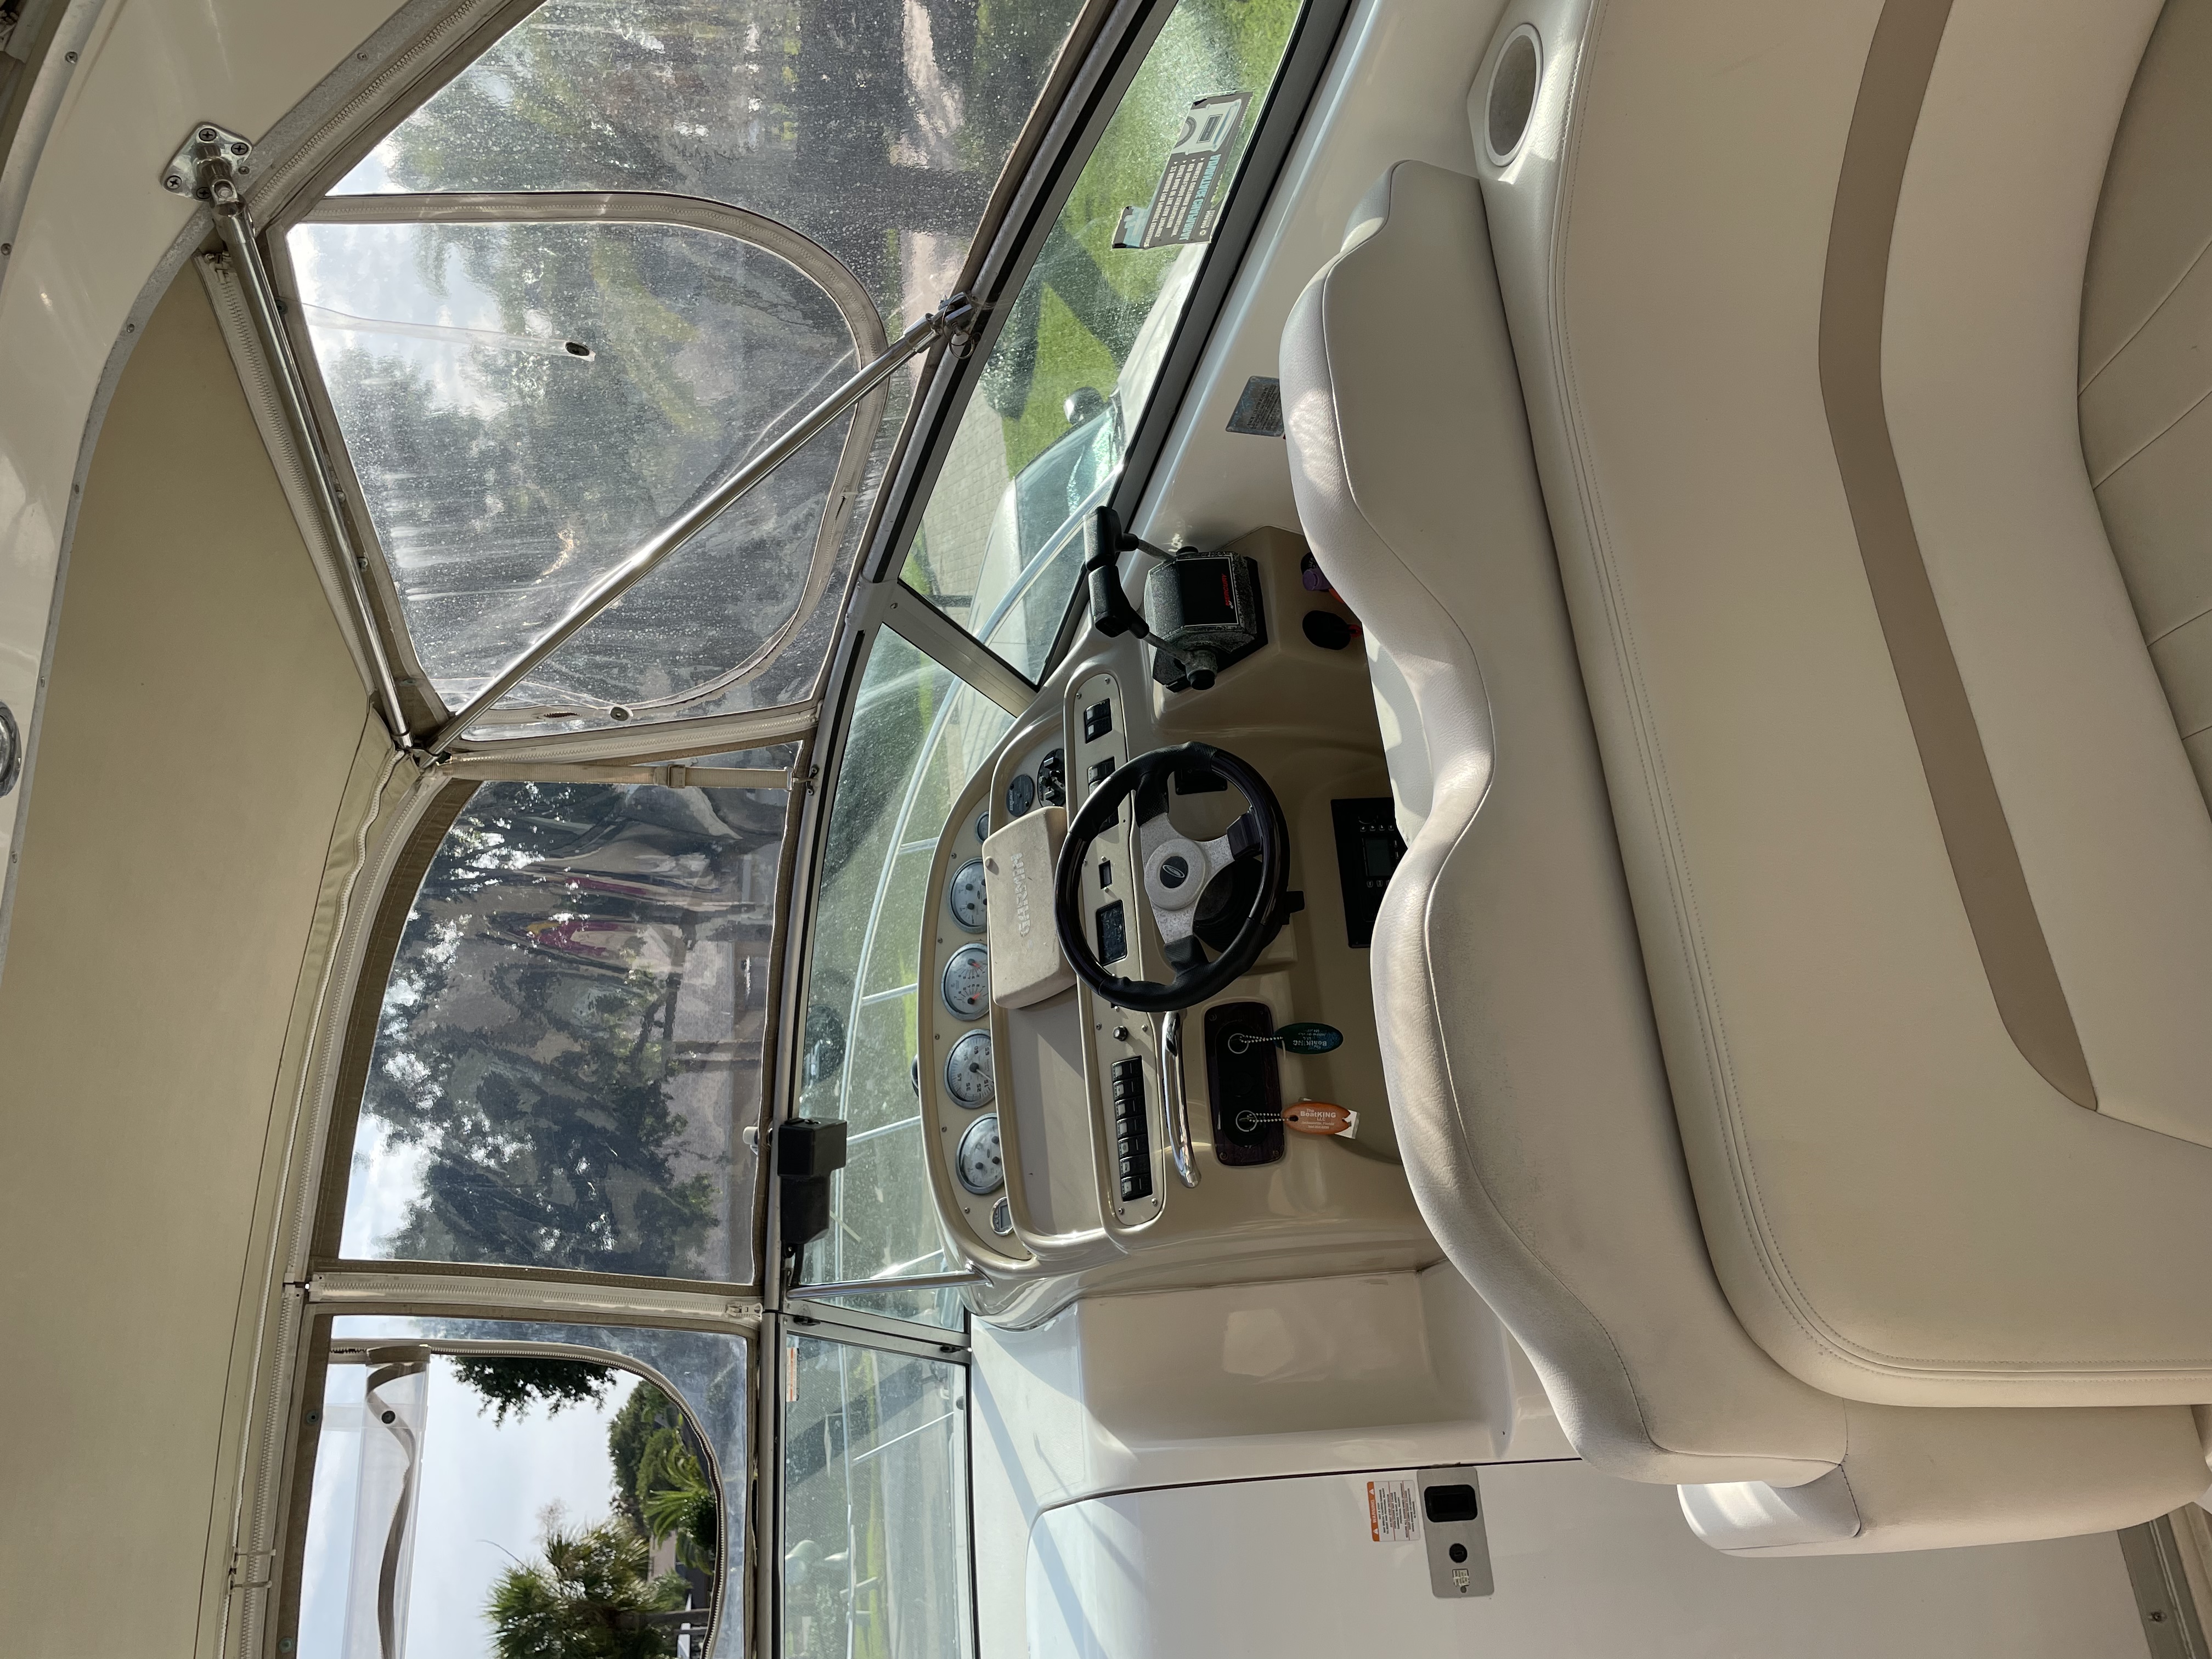 2003 Chaparral Signature 280 Power boat for sale in Jacksonville, FL - image 12 